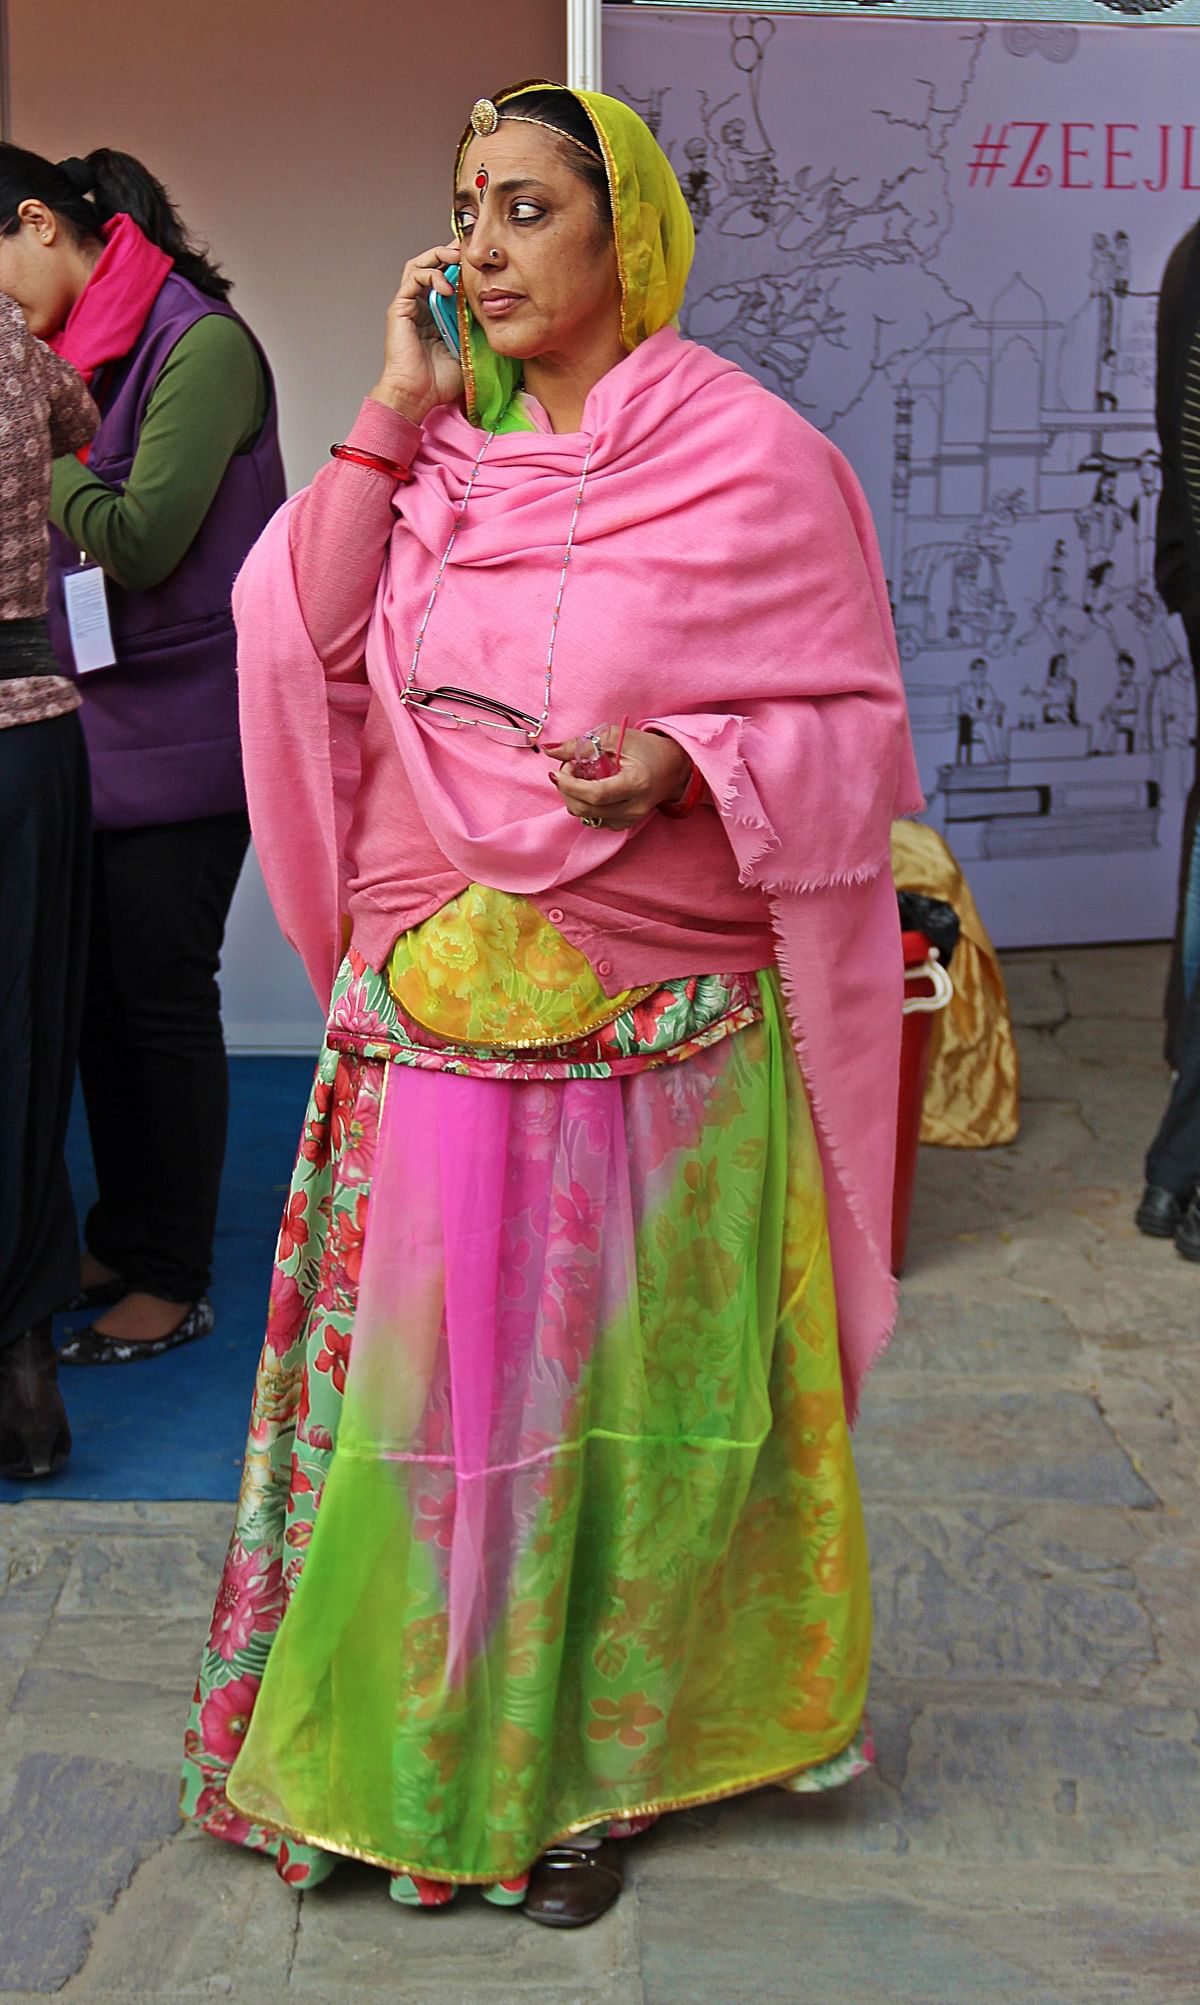 Jaipur Lit Fest isn’t just about the publishing glitterati – it’s also about the fashion! 